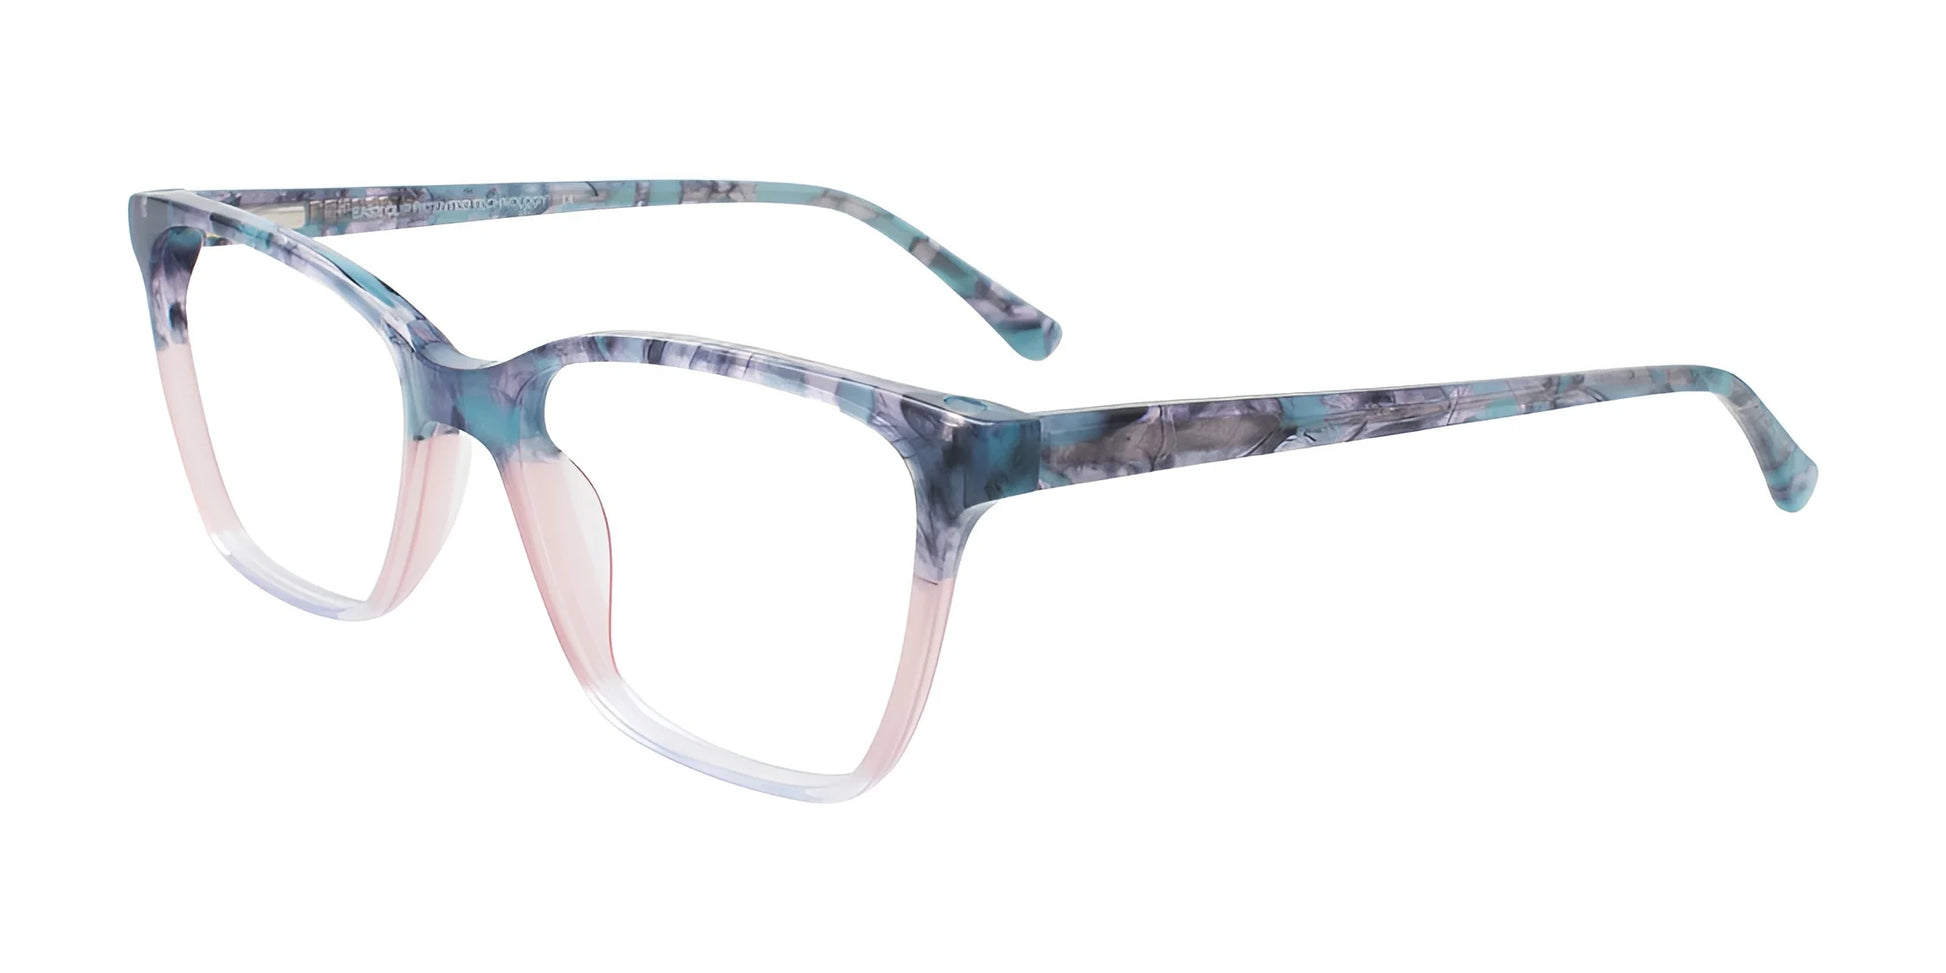 EasyClip EC680 Eyeglasses with Clip-on Sunglasses Trans Marble Blue & Pink & Crystal